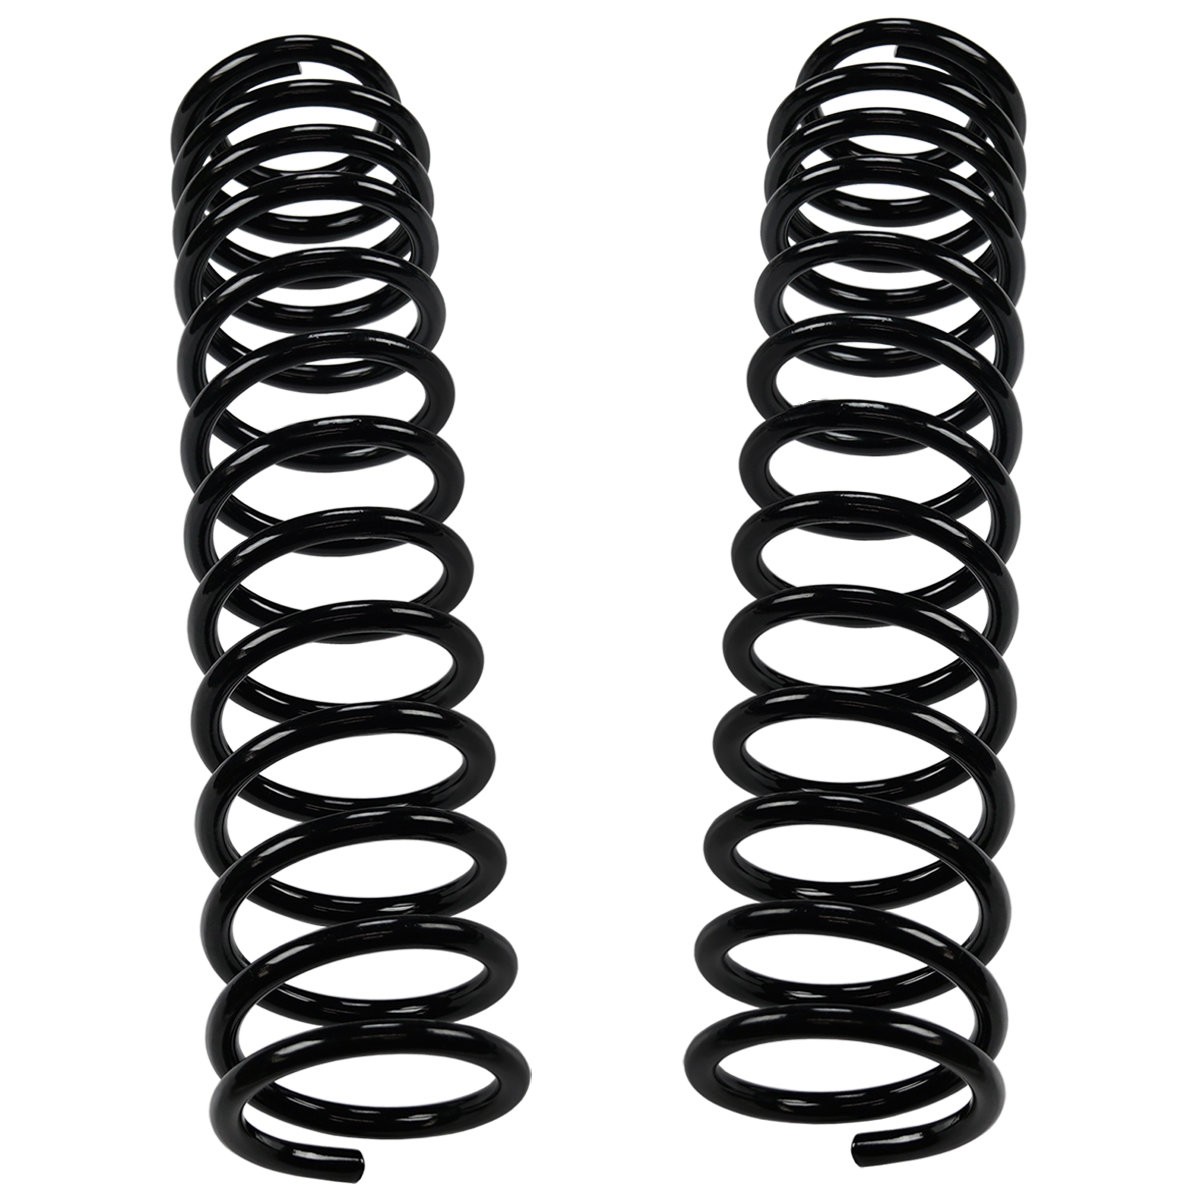 2018-2020 Jeep Wrangler JL 2 Door Including Rubicon Rear Pair Superlift|599|Dual Rate Coil Springs 4 inch lift 